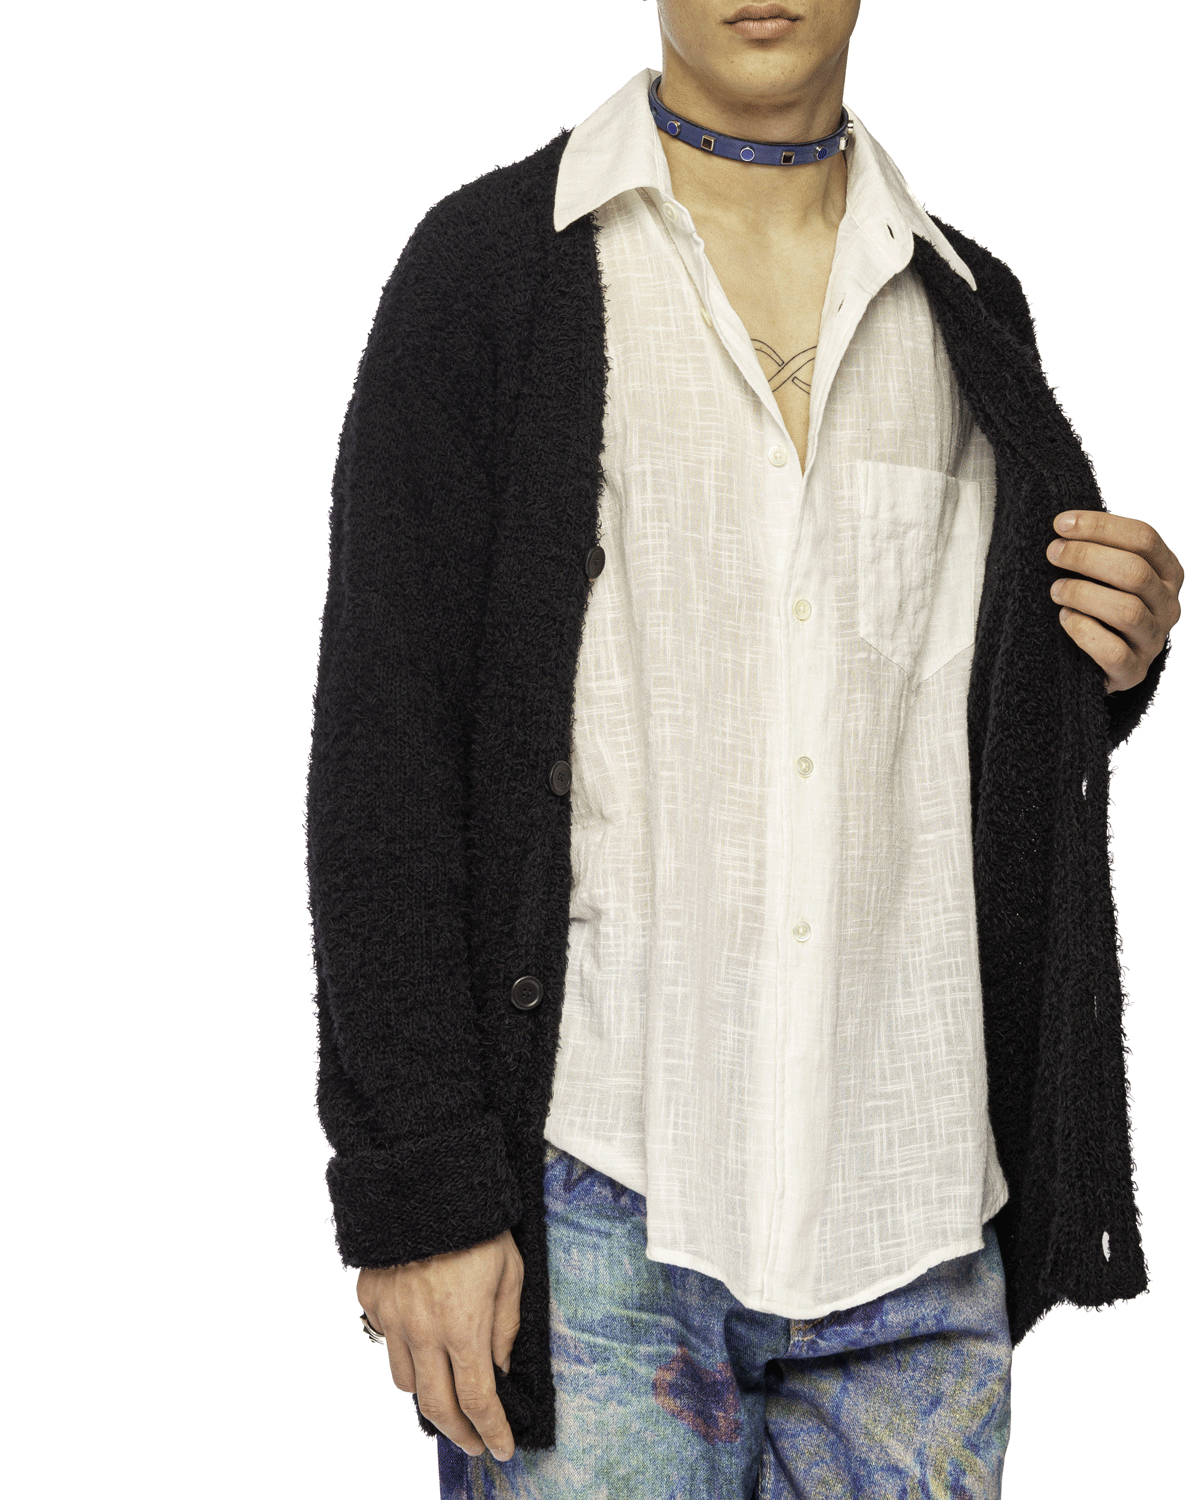 Knitted Cardigan Black Cloudy Cotton